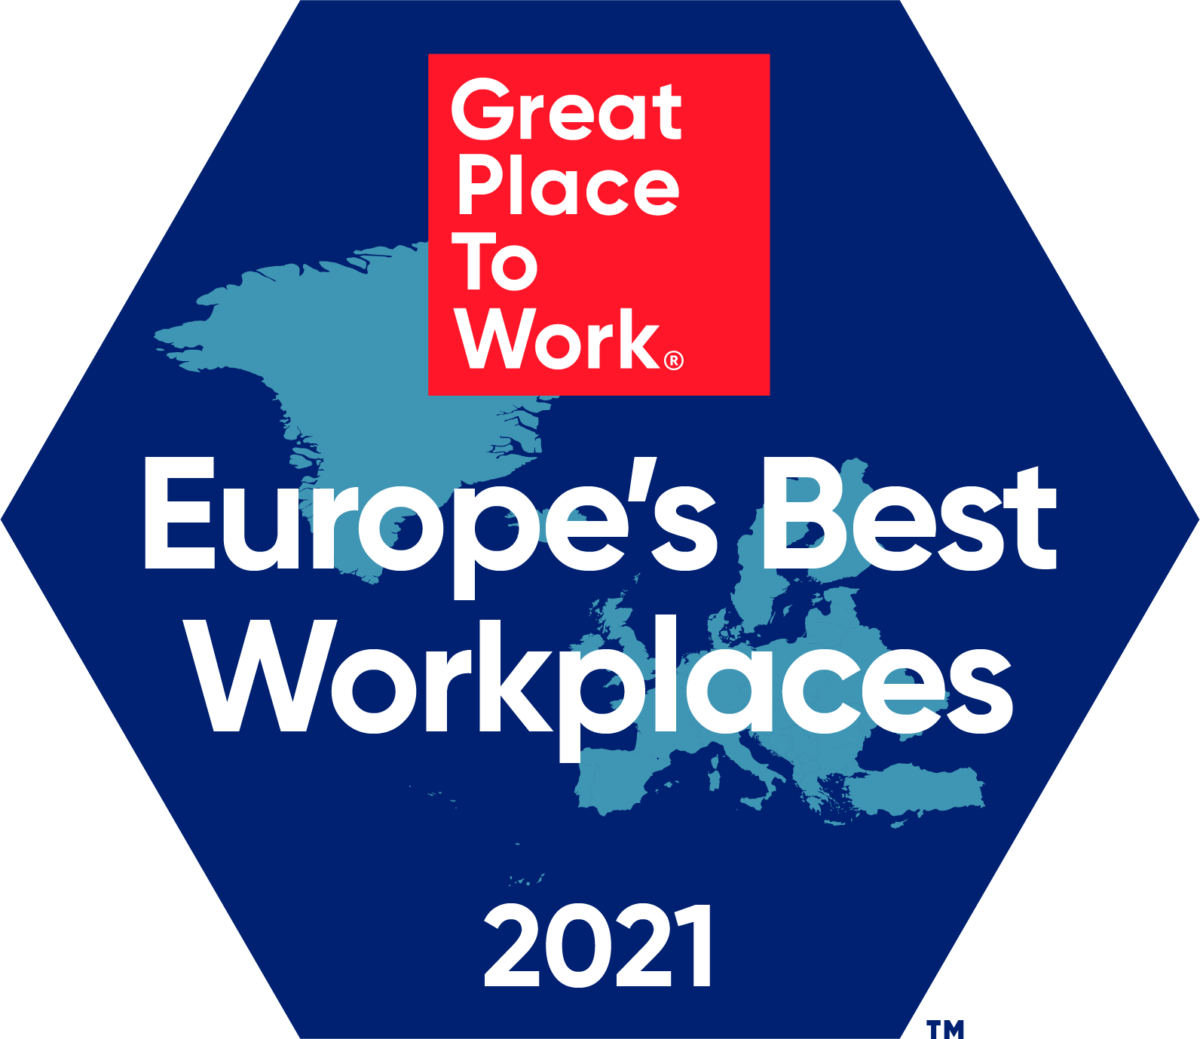 Great Place To Work - Europe's Best Workplaces 2021.